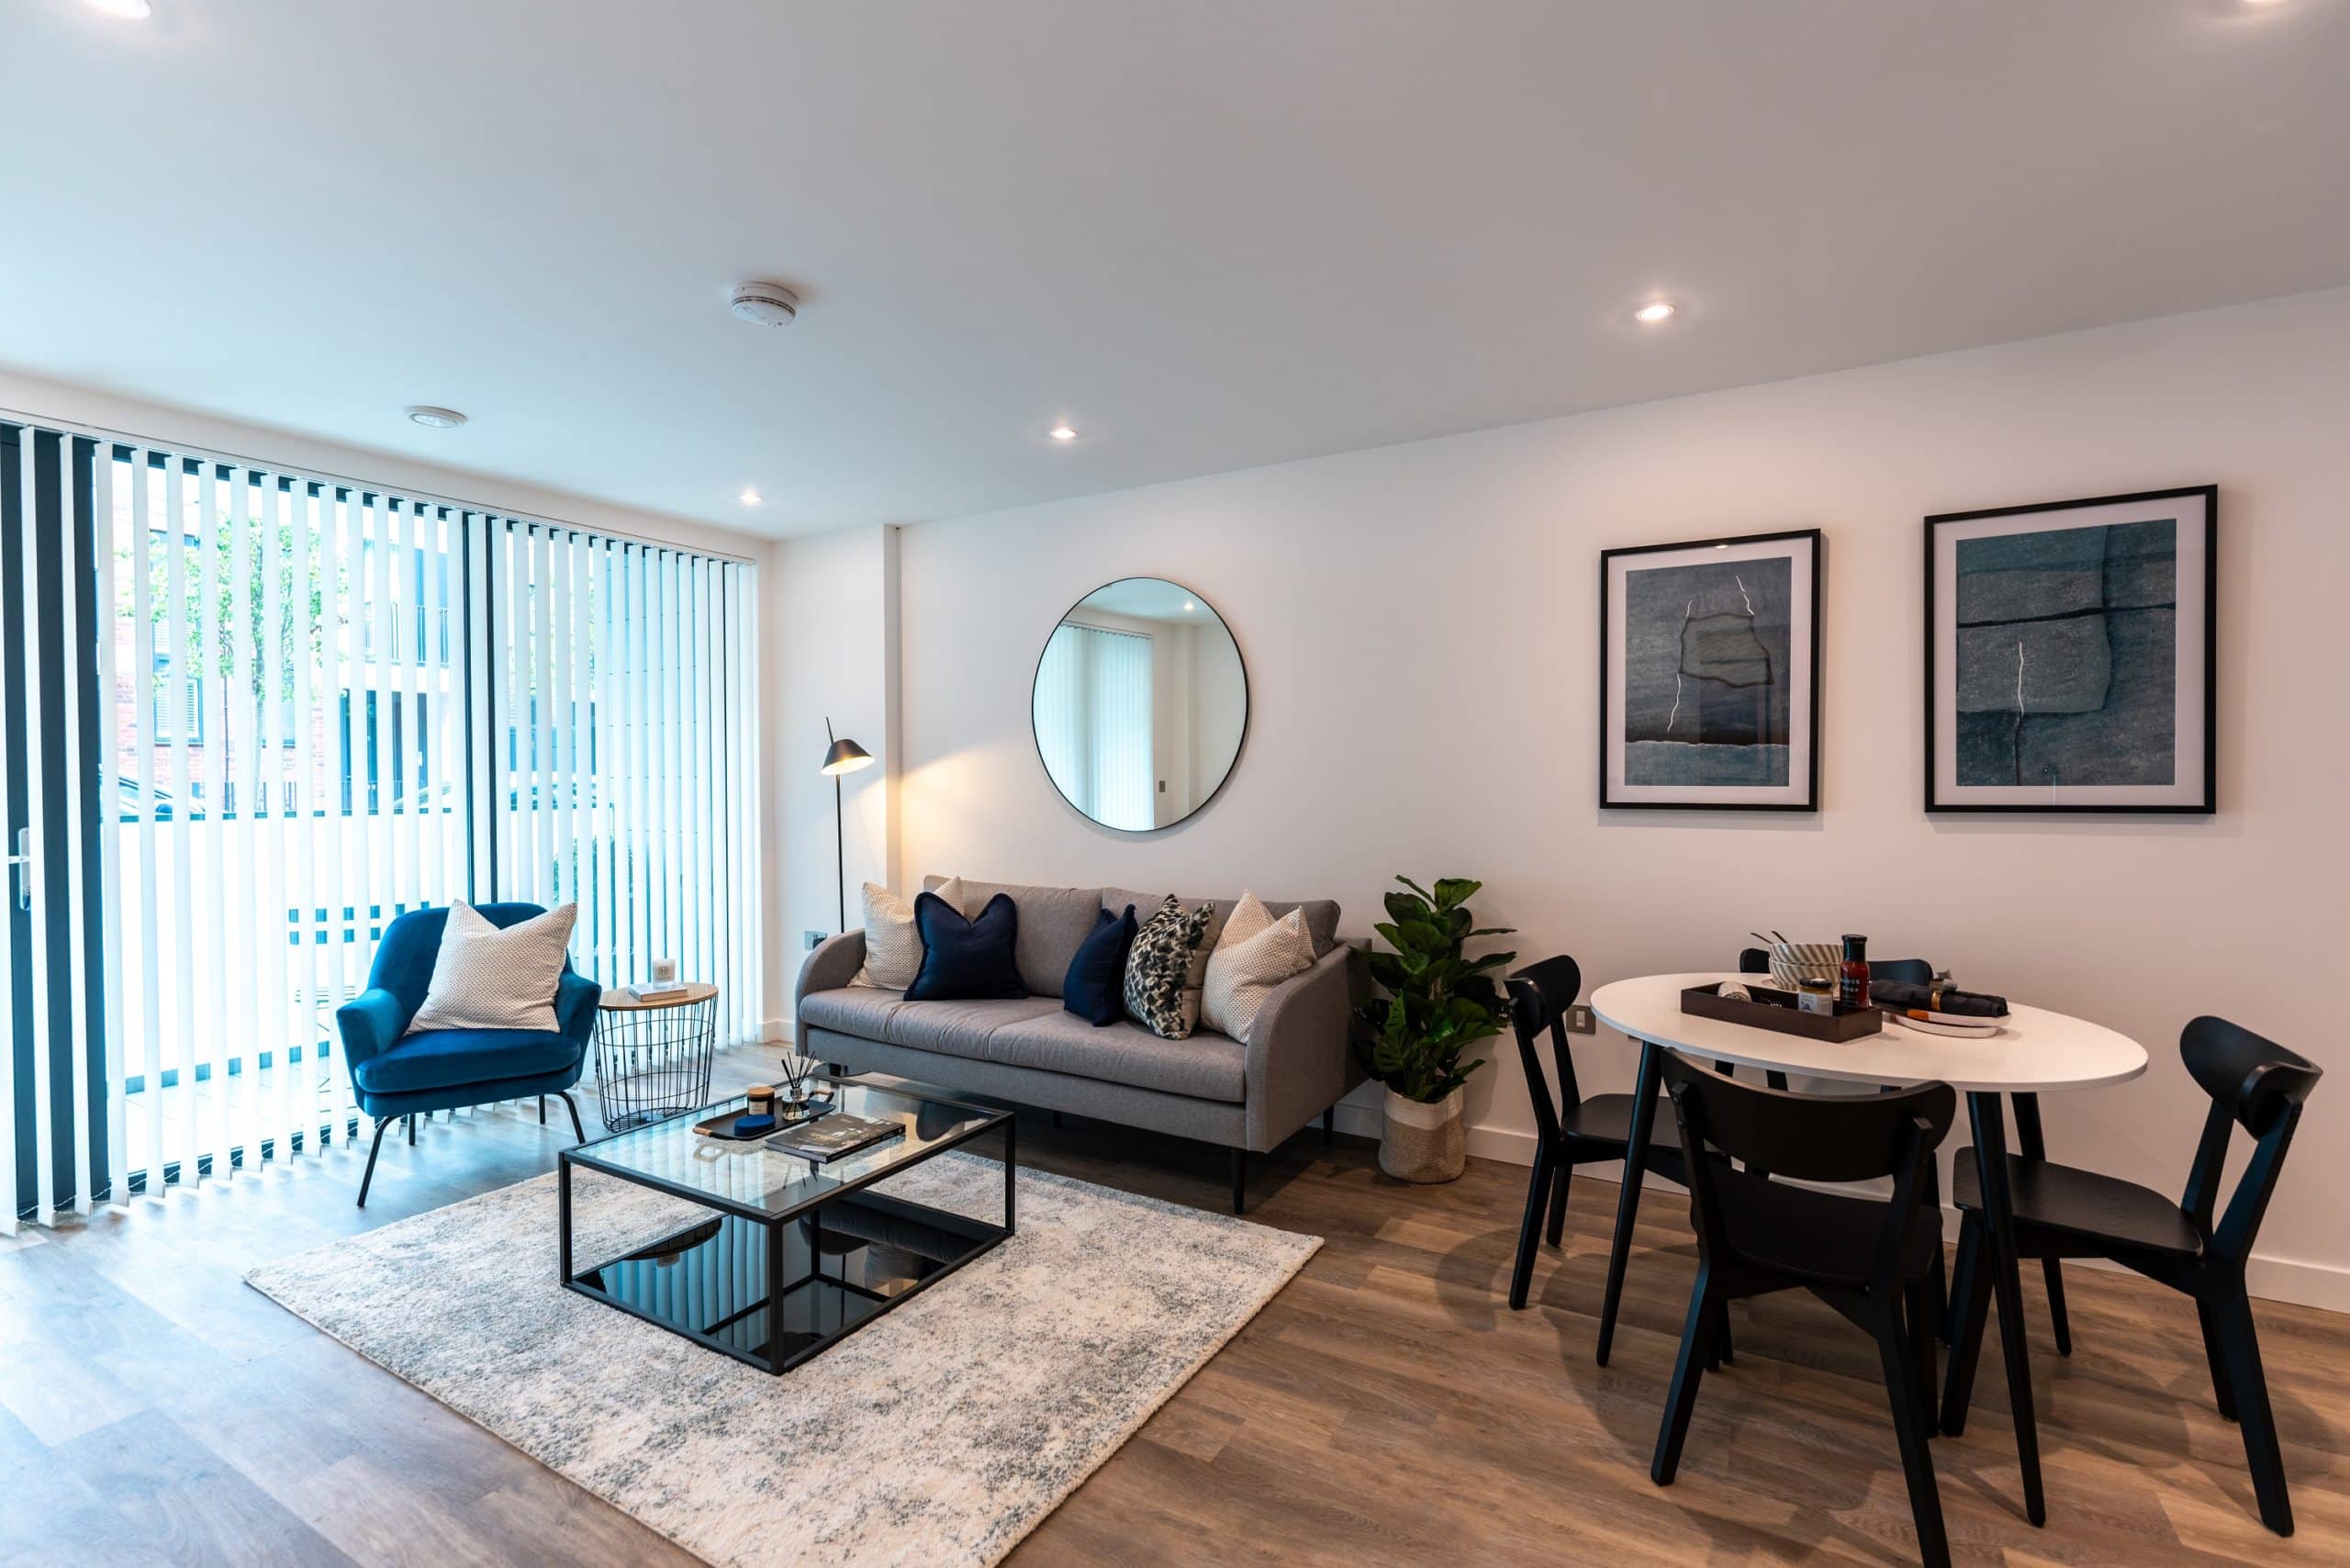 Internal show home photography of L&Q at Greenwich Square - Shared Ownership homes available on Share to Buy